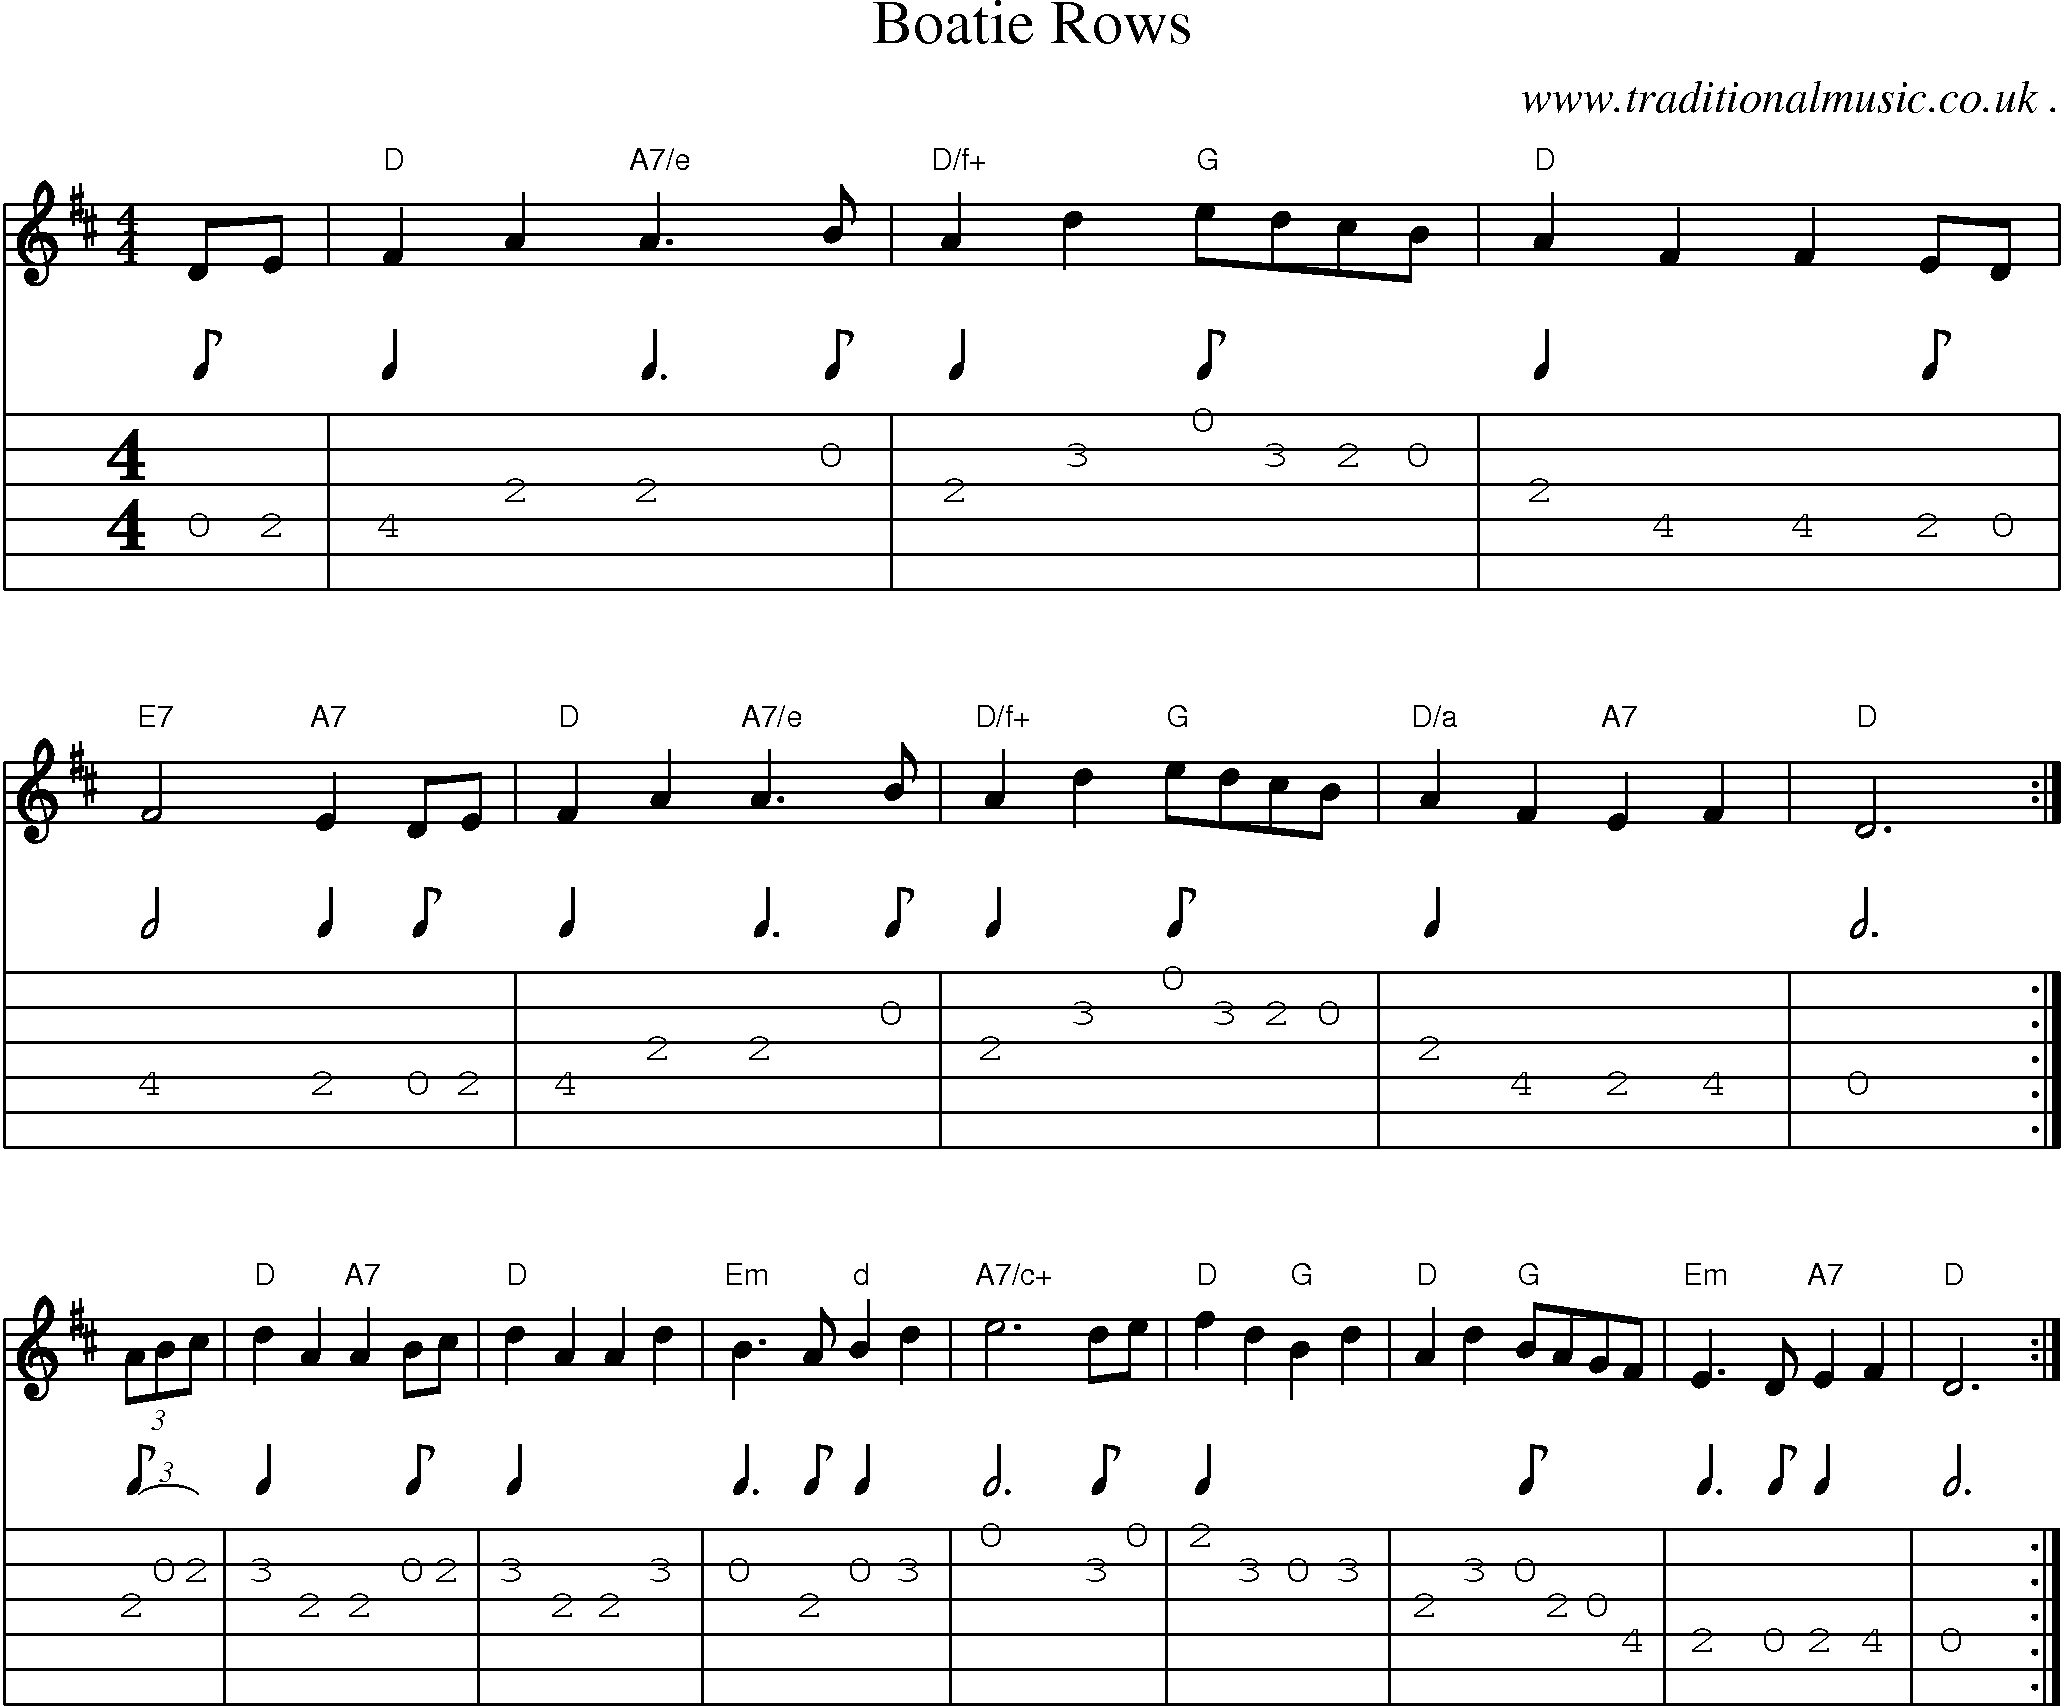 Sheet-Music and Guitar Tabs for Boatie Rows